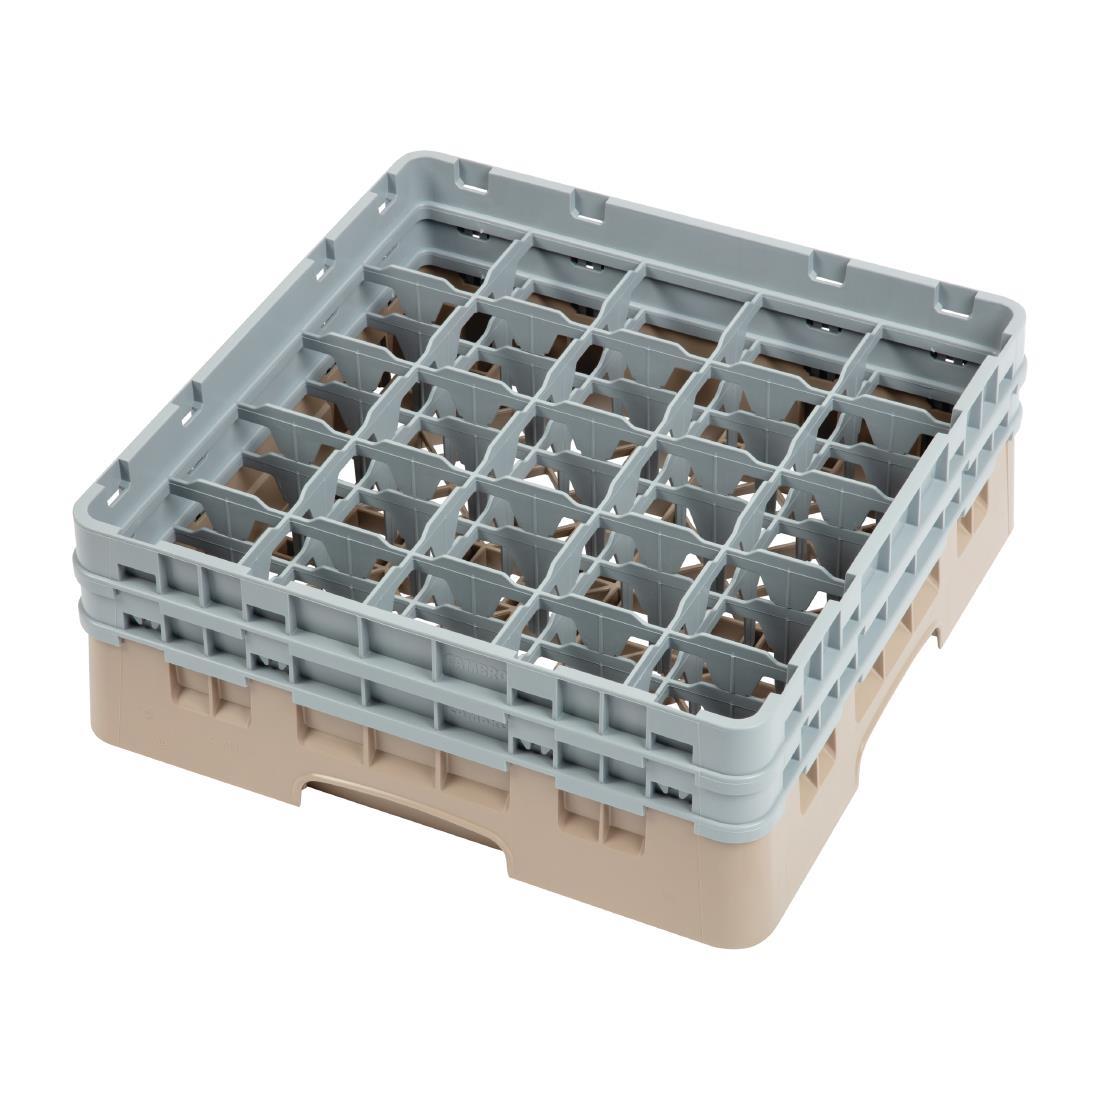 Cambro Camrack Beige 25 Compartments Max Glass Height 133mm - DW555  - 1